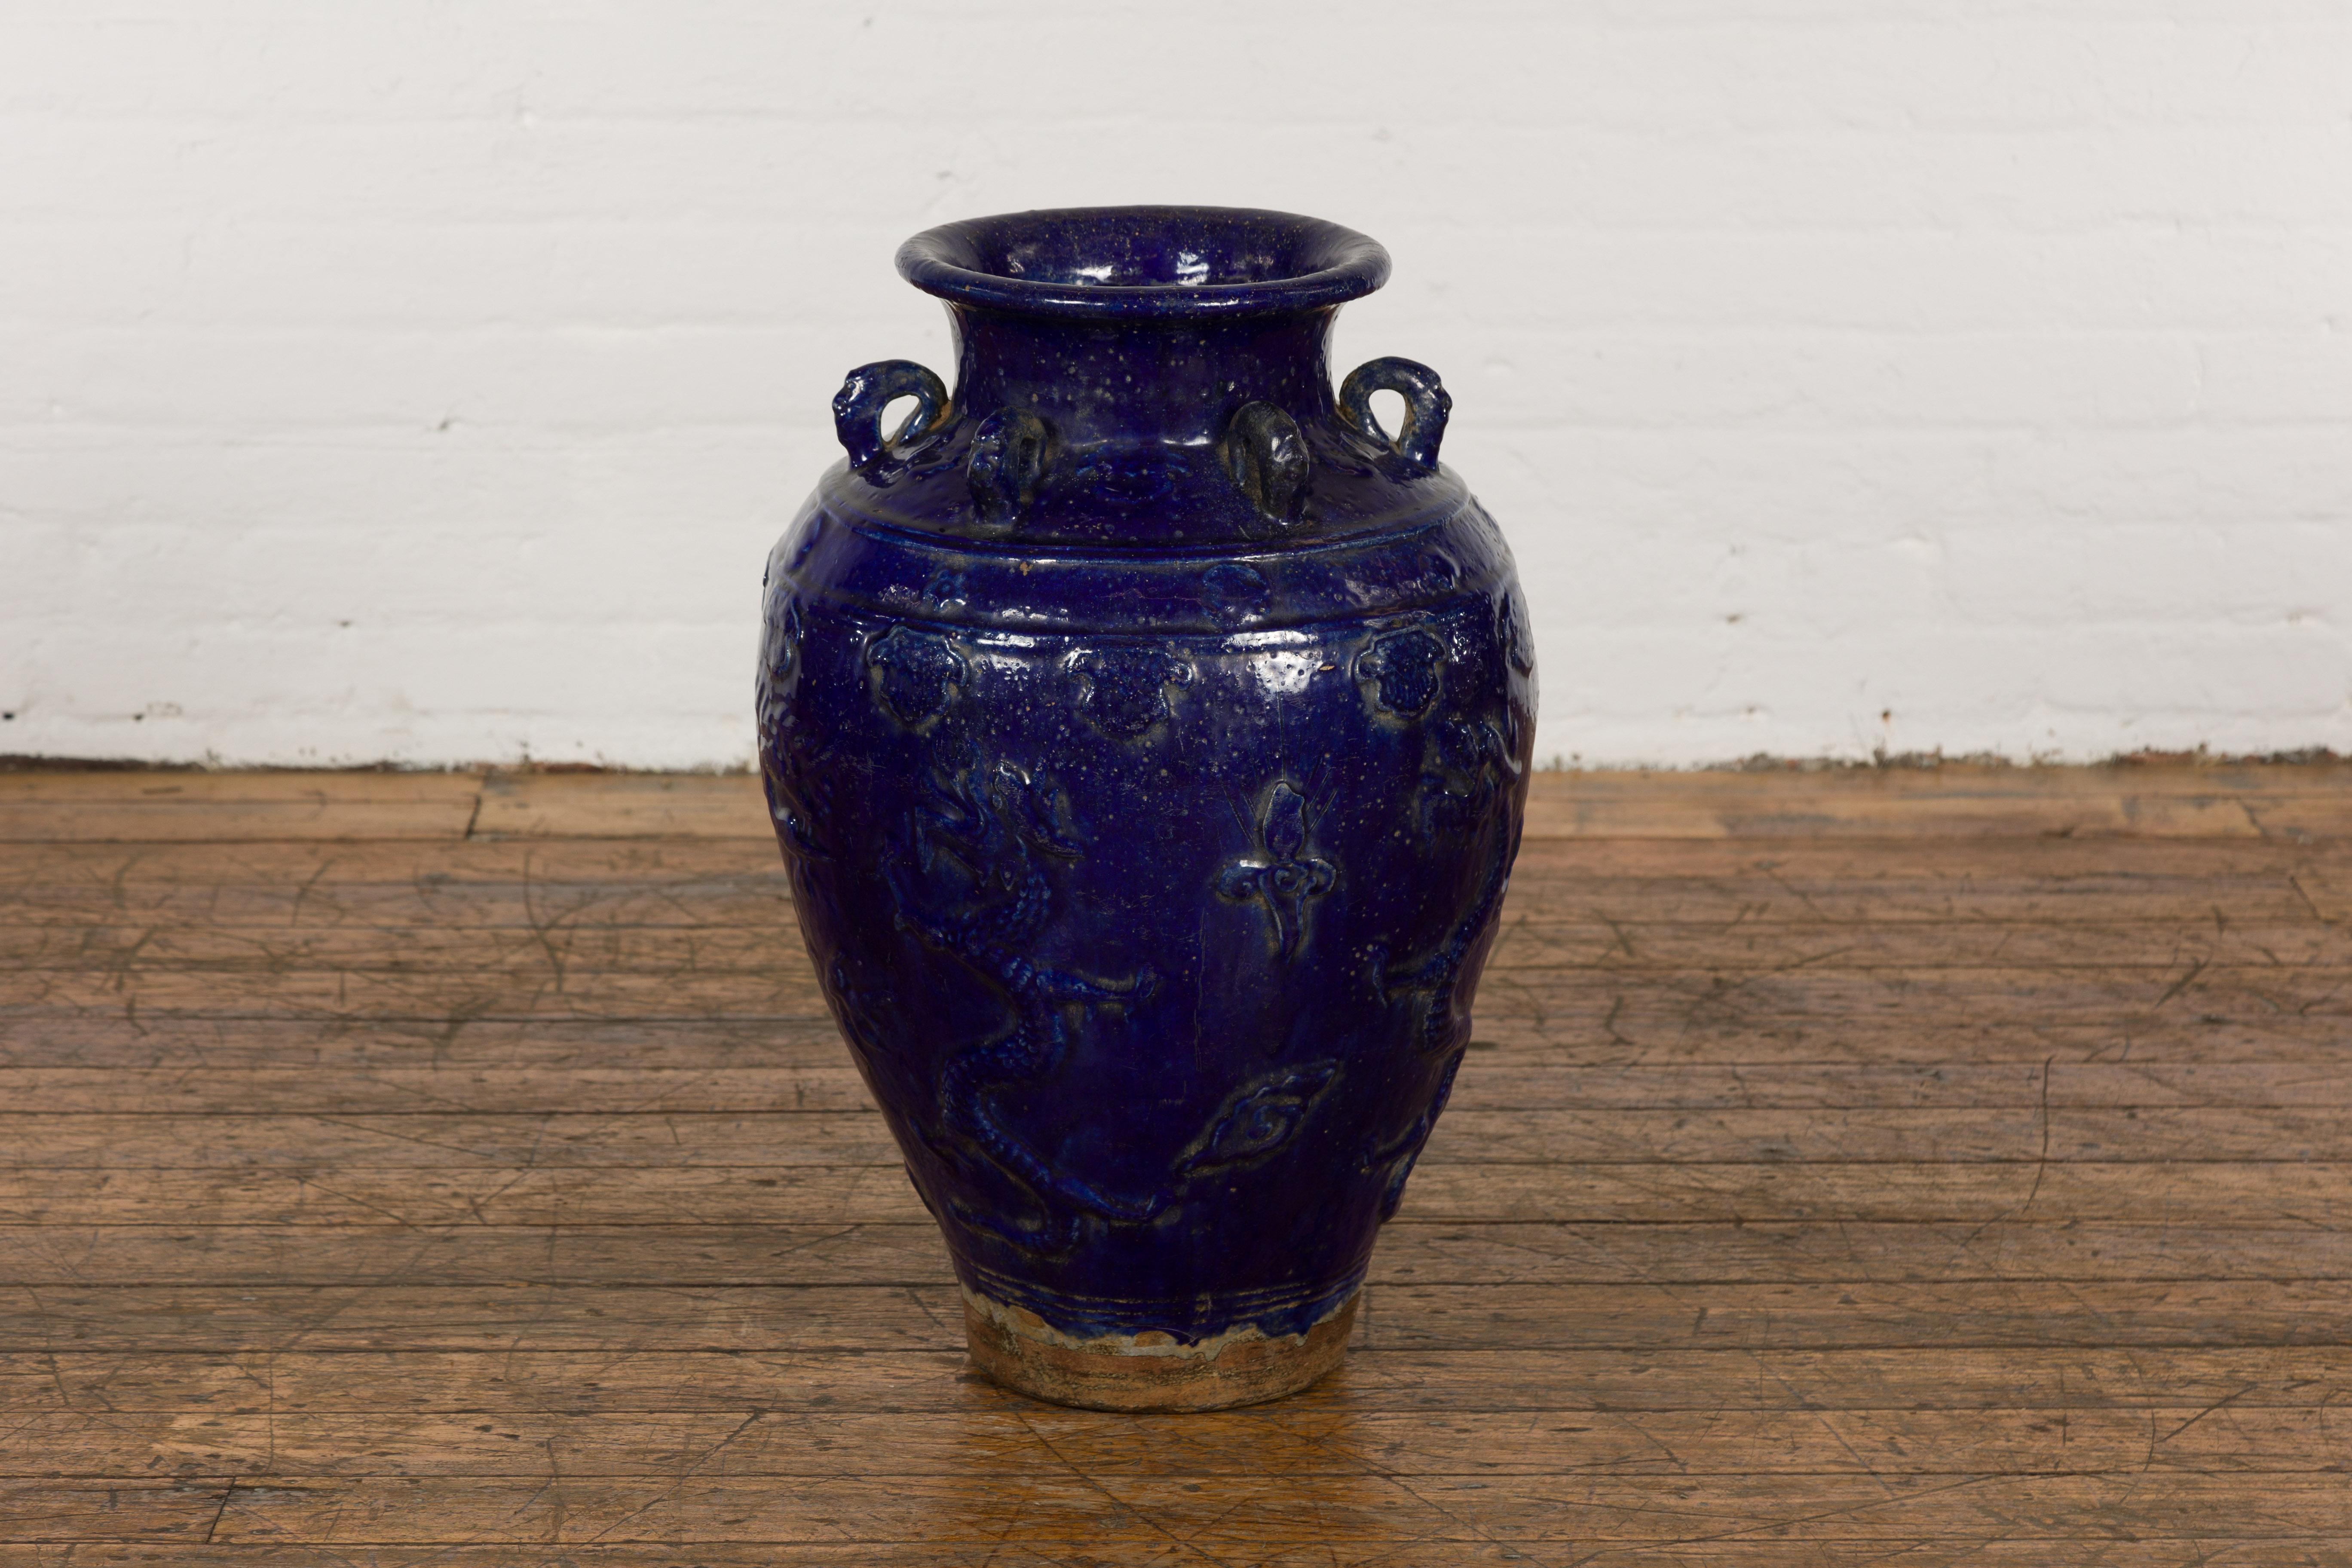 An antique Chinese Qing Dynasty period cobalt blue glazed Martaban jar from the 19th century with dragon, flower and cloud motifs, swan neck loops and unglazed bottom. Immerse yourself in the historic richness of Chinese art with this antique Qing